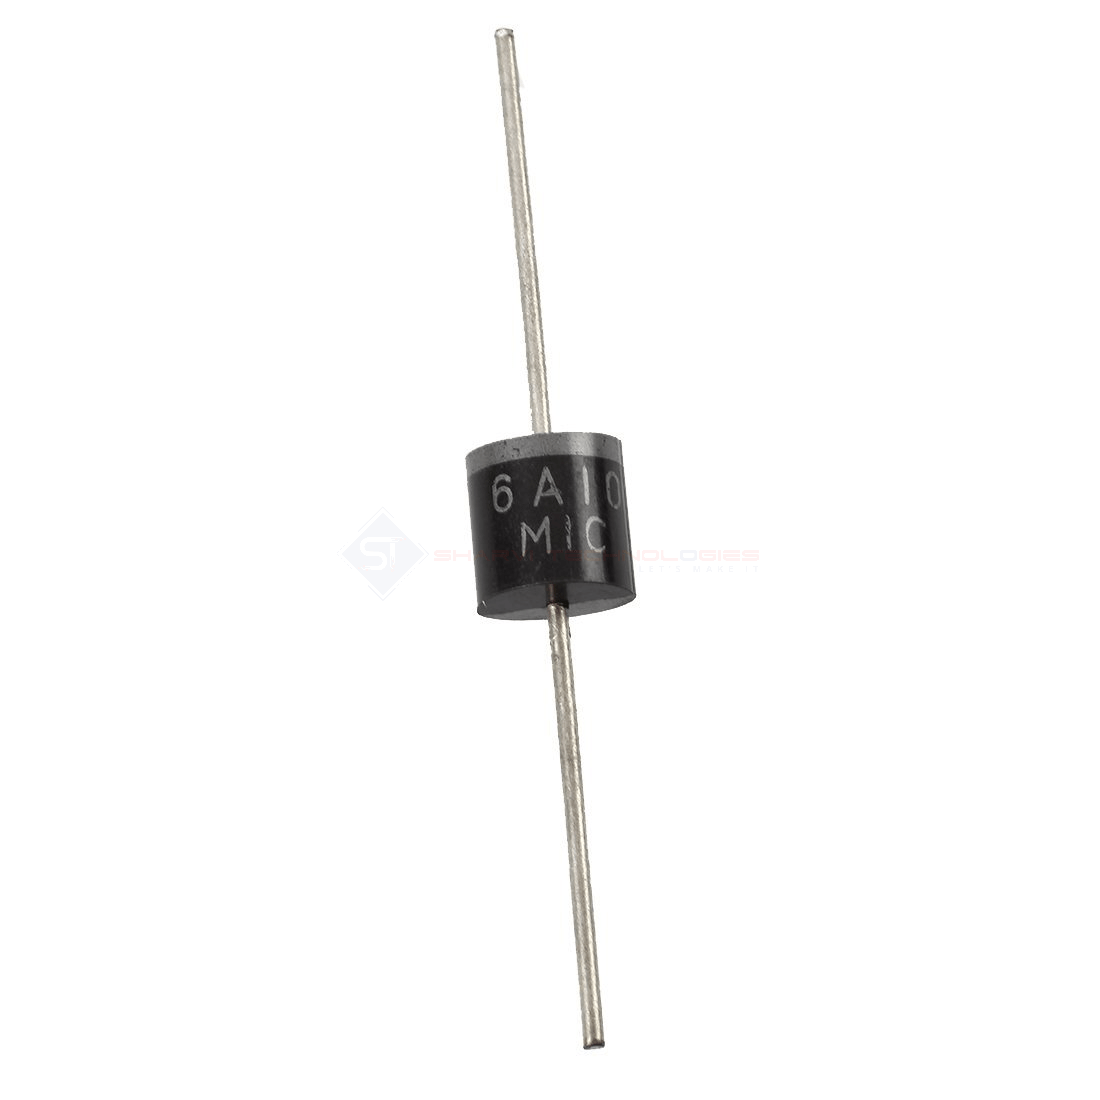 6A10 Diode-1000V 6A Silicon Rectifier - R-6 Package